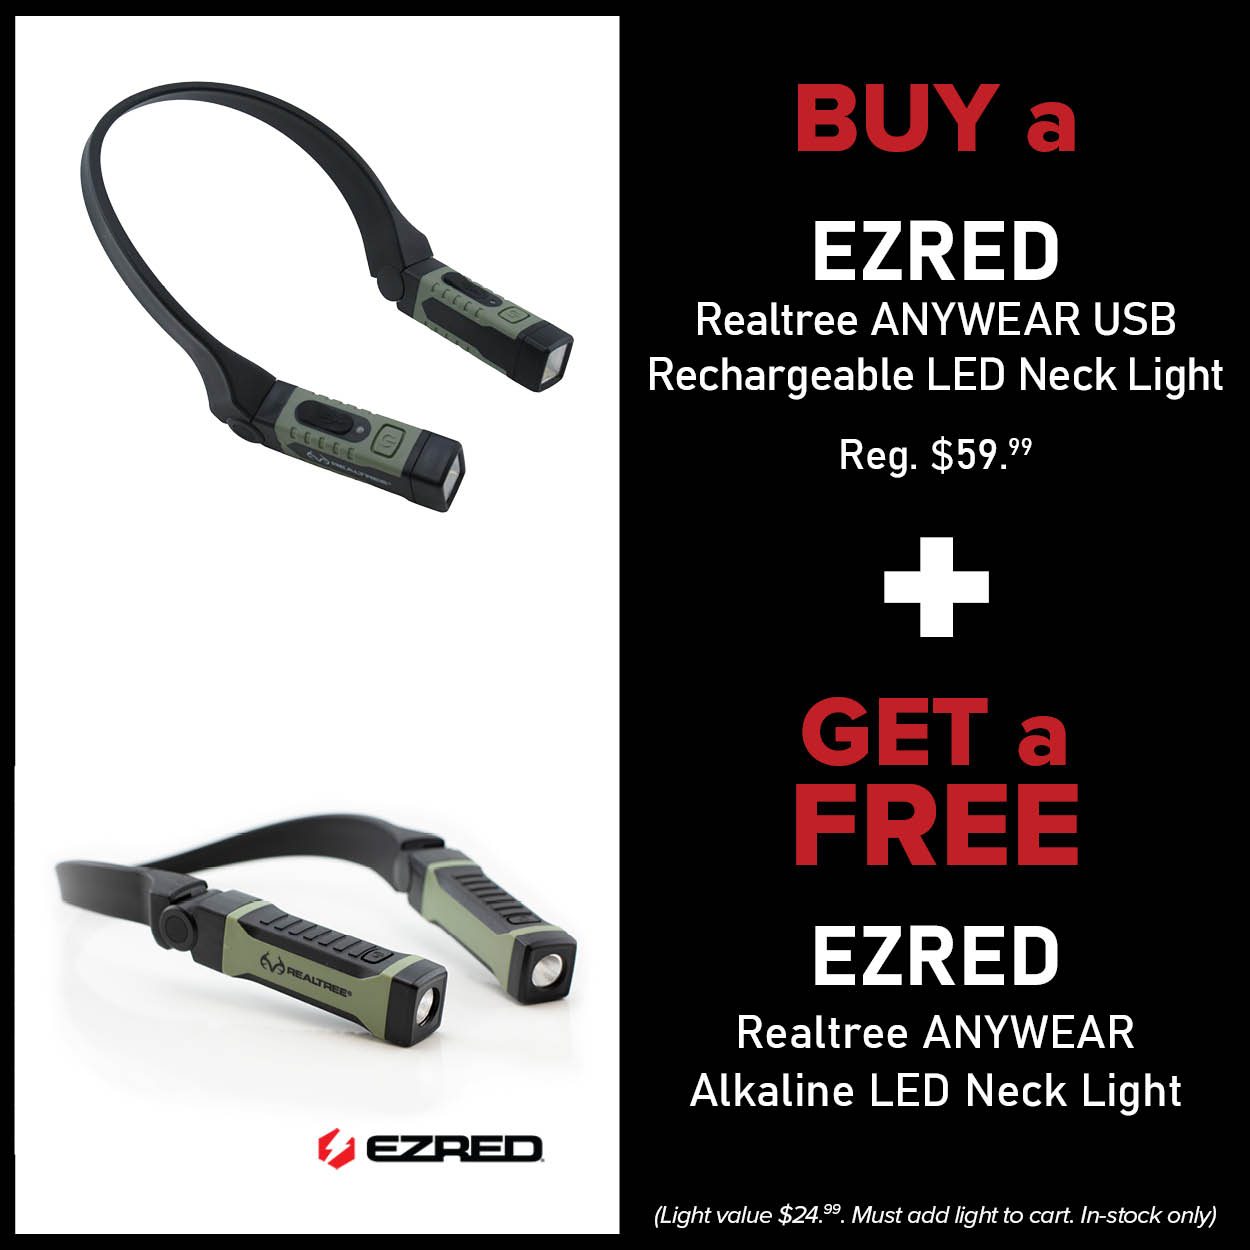 Get a Free EZRED Realtree ANYWEAR Alkaline LED Neck Light when you purchase a EZRED Realtree ANYWEAR USB Rechargeable LED Neck Light Reg. $59.99 (Light value $24.99. Must add both lights to cart. In-stock only)